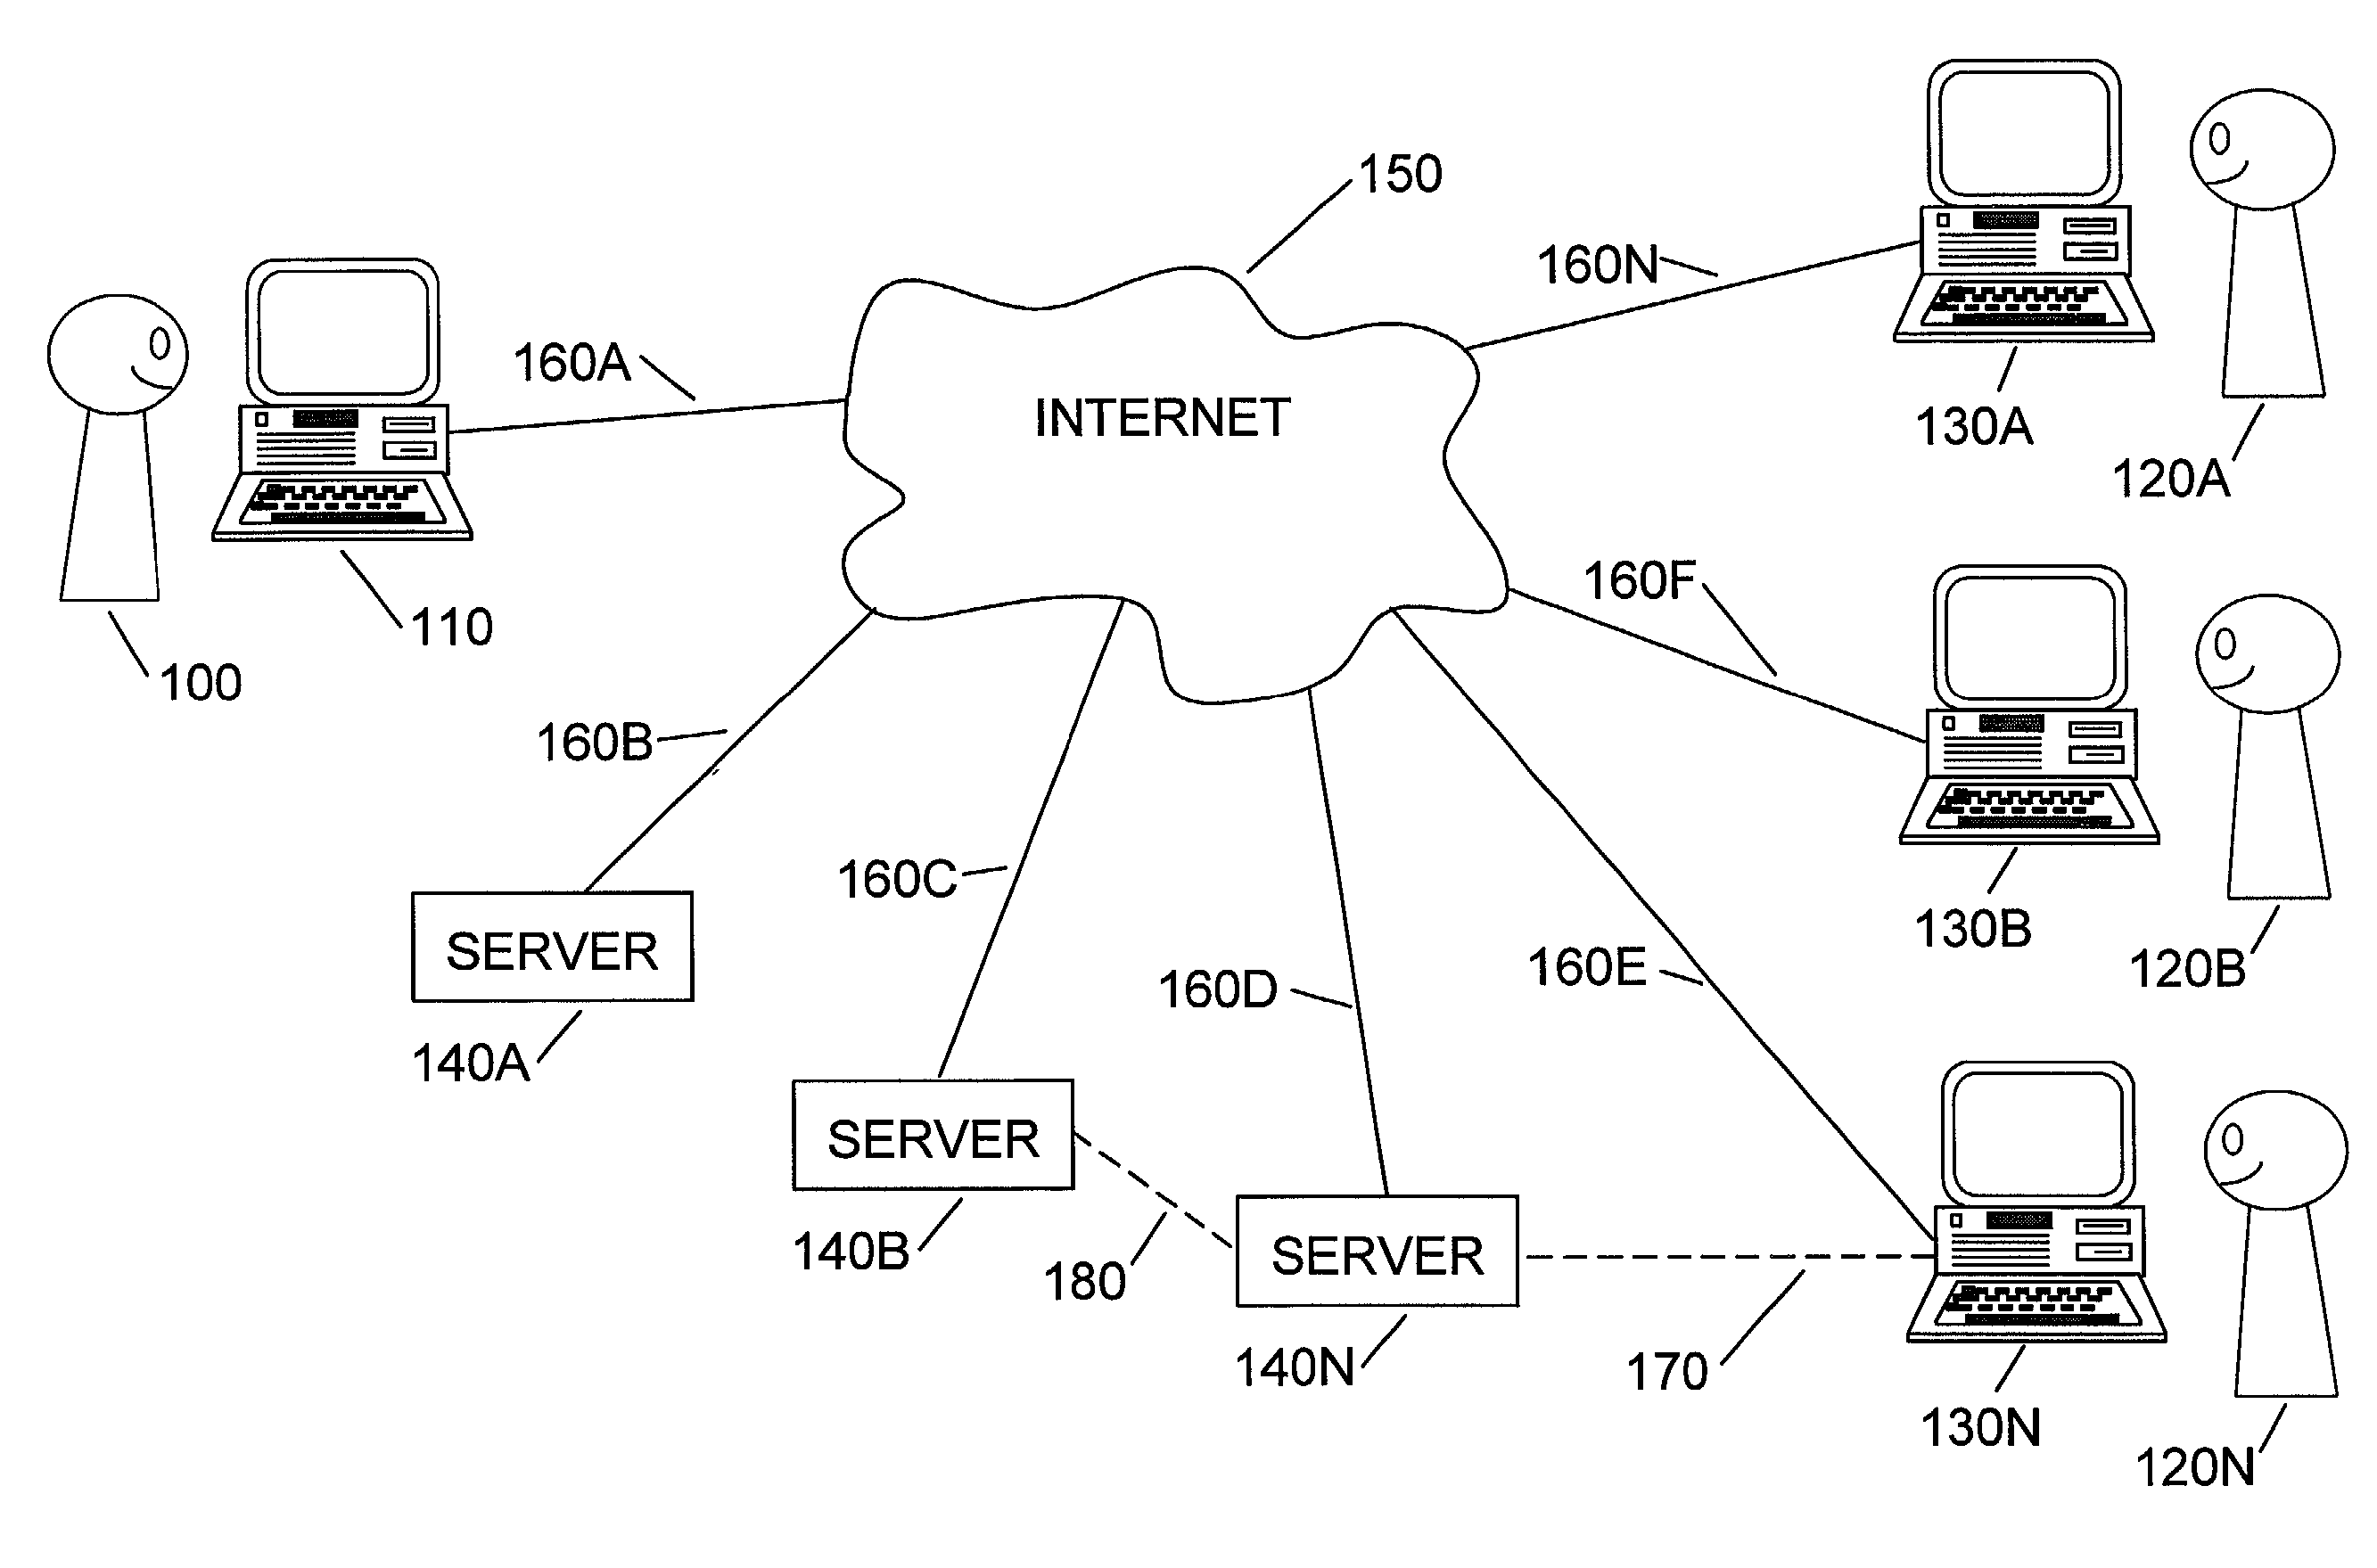 Transfer of an internet chat session between servers